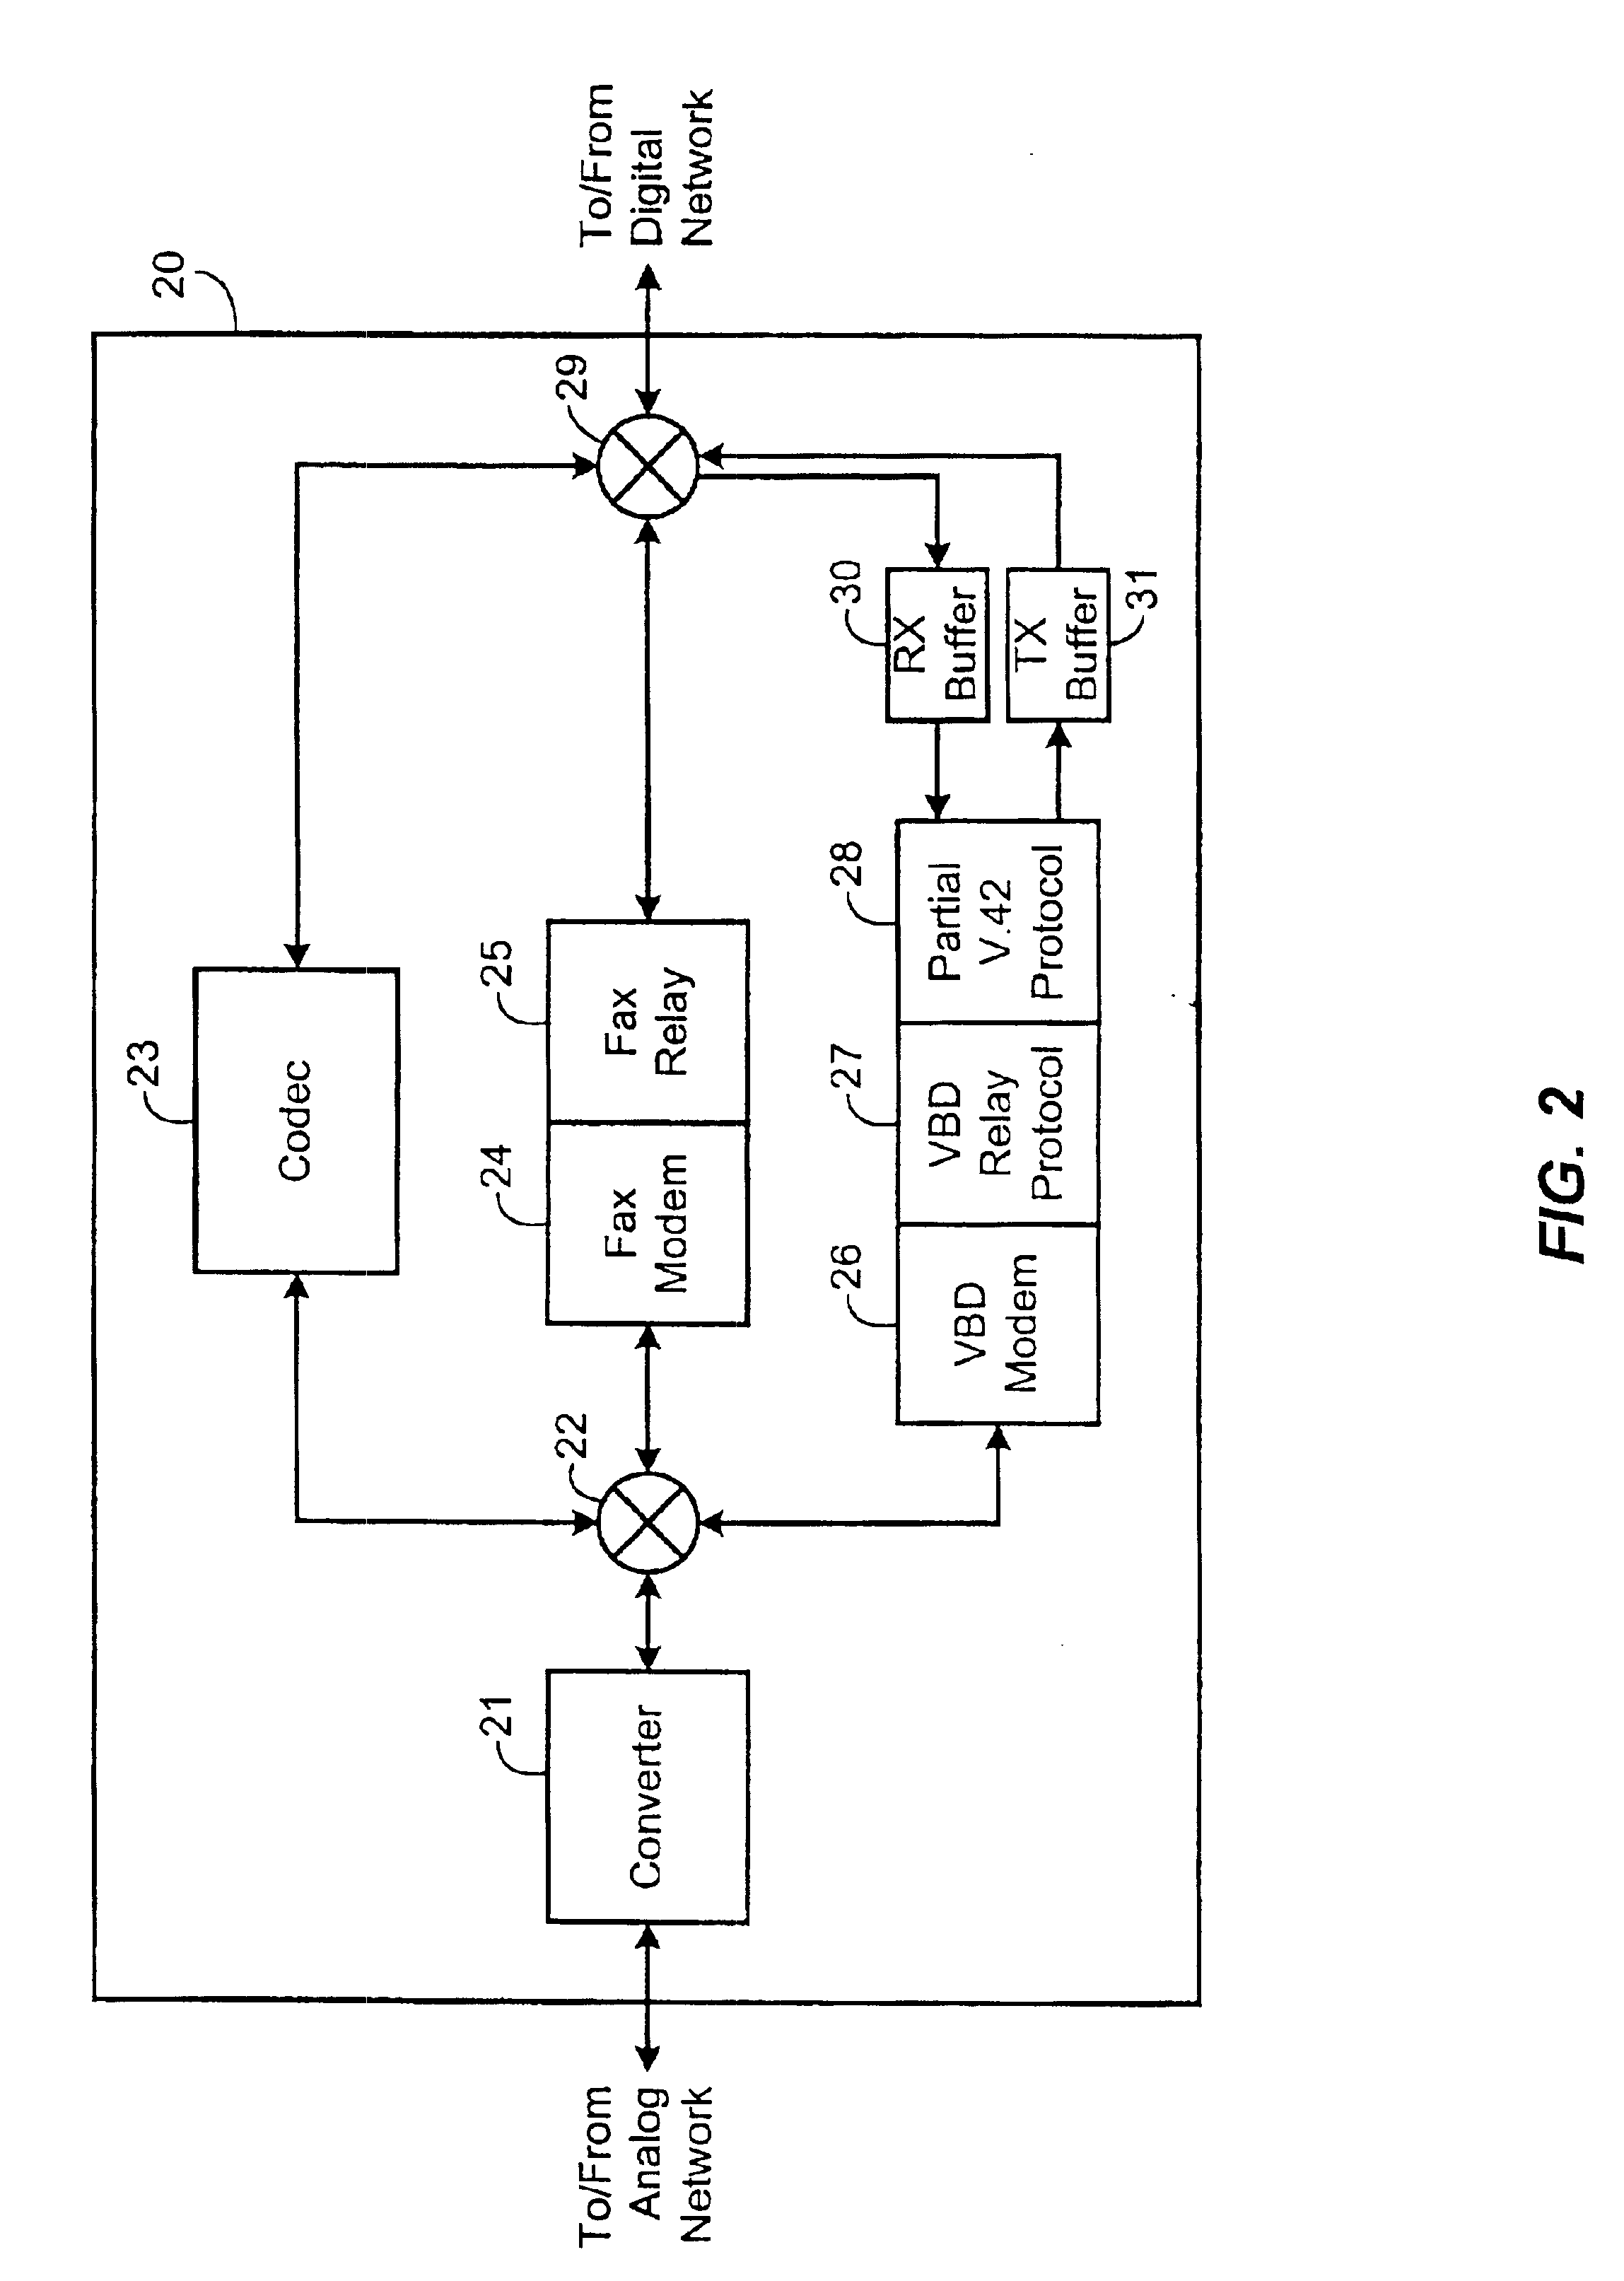 System and method for implementing an end-to-end error-correcting protocol in a voice band data relay system